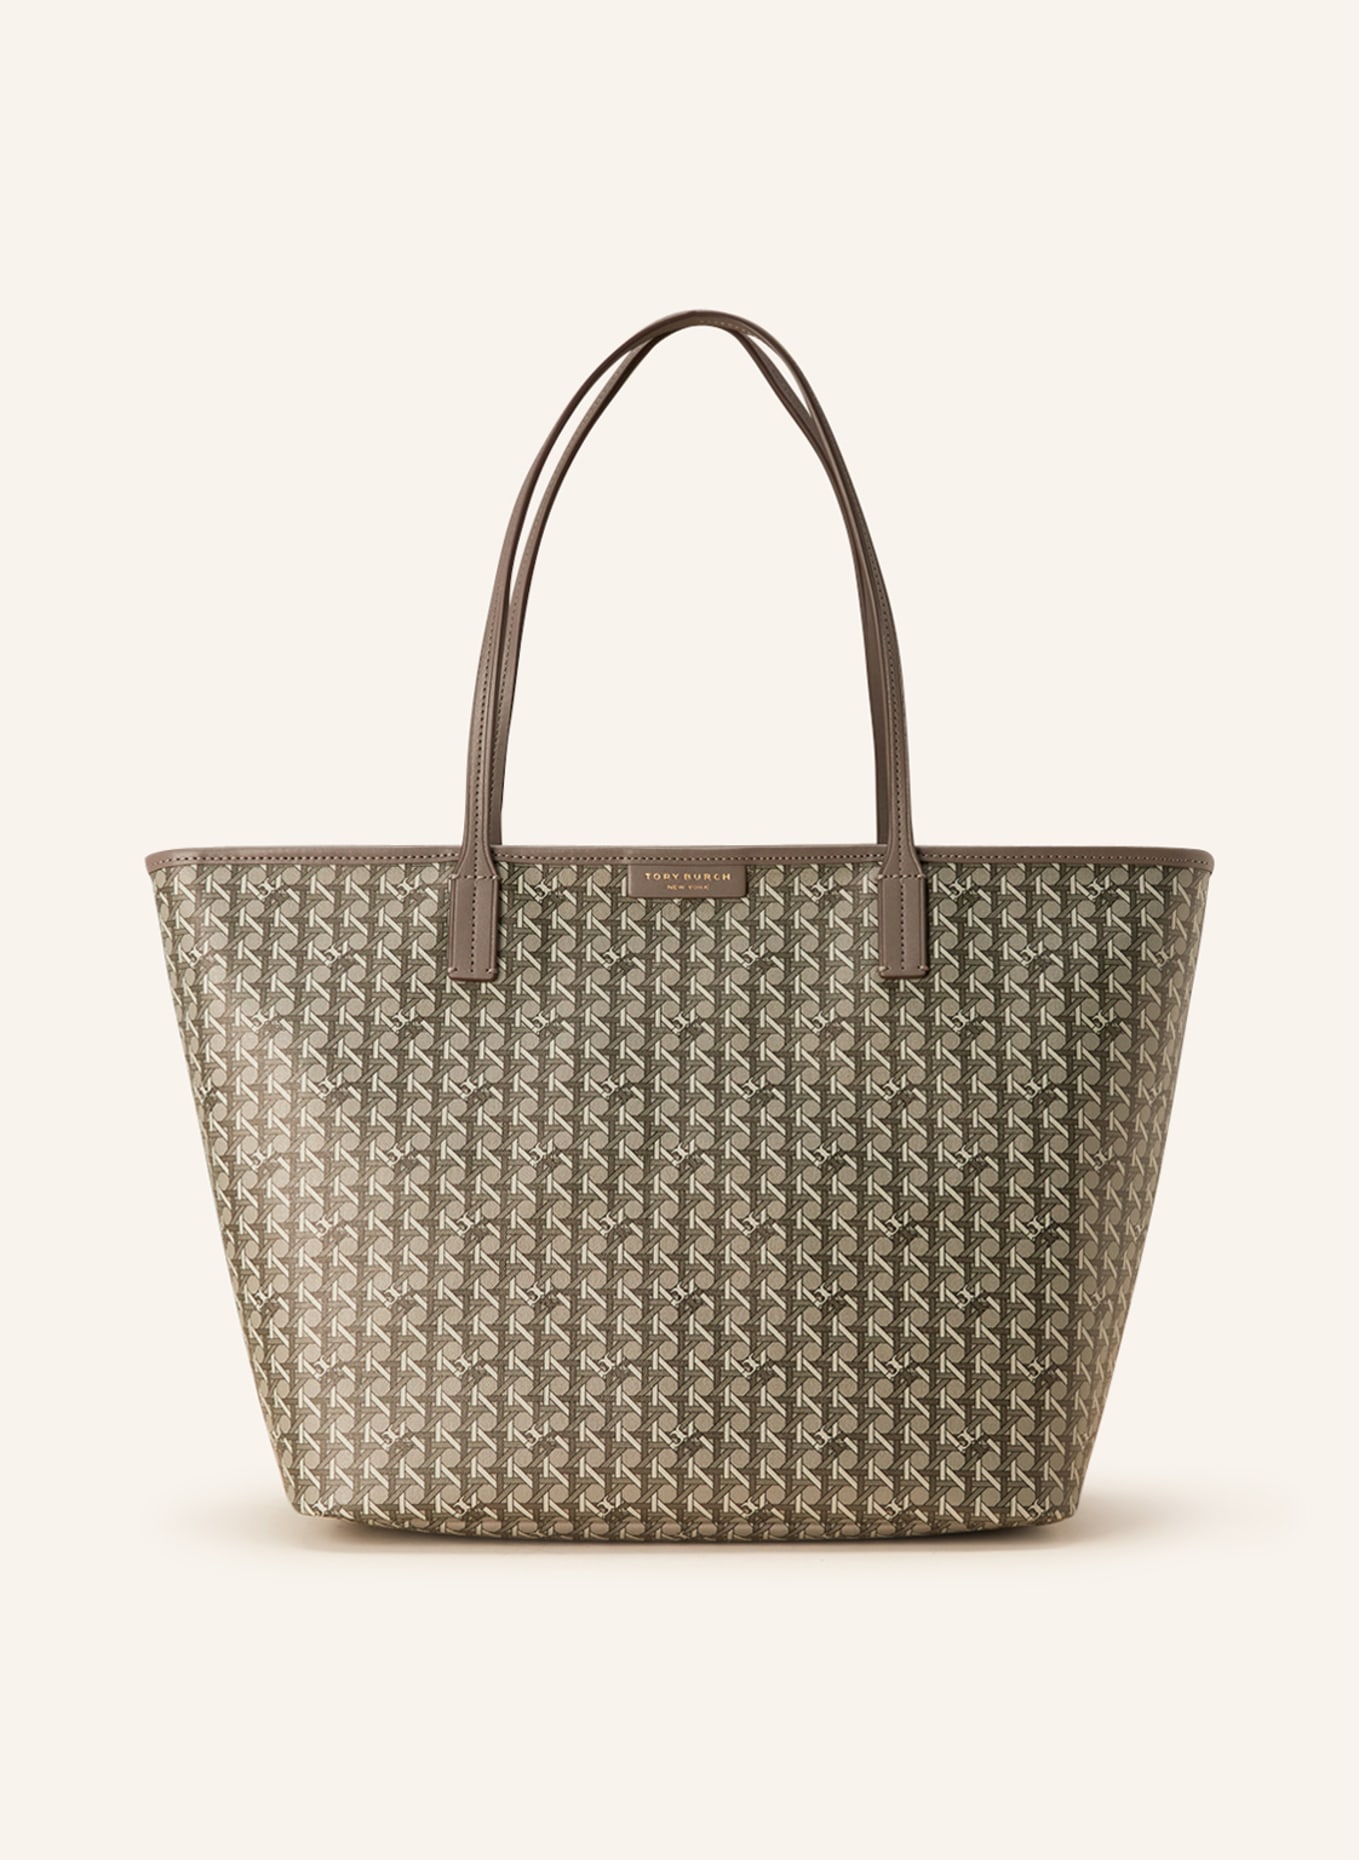 Tory Burch Gray Tote Bags for Women